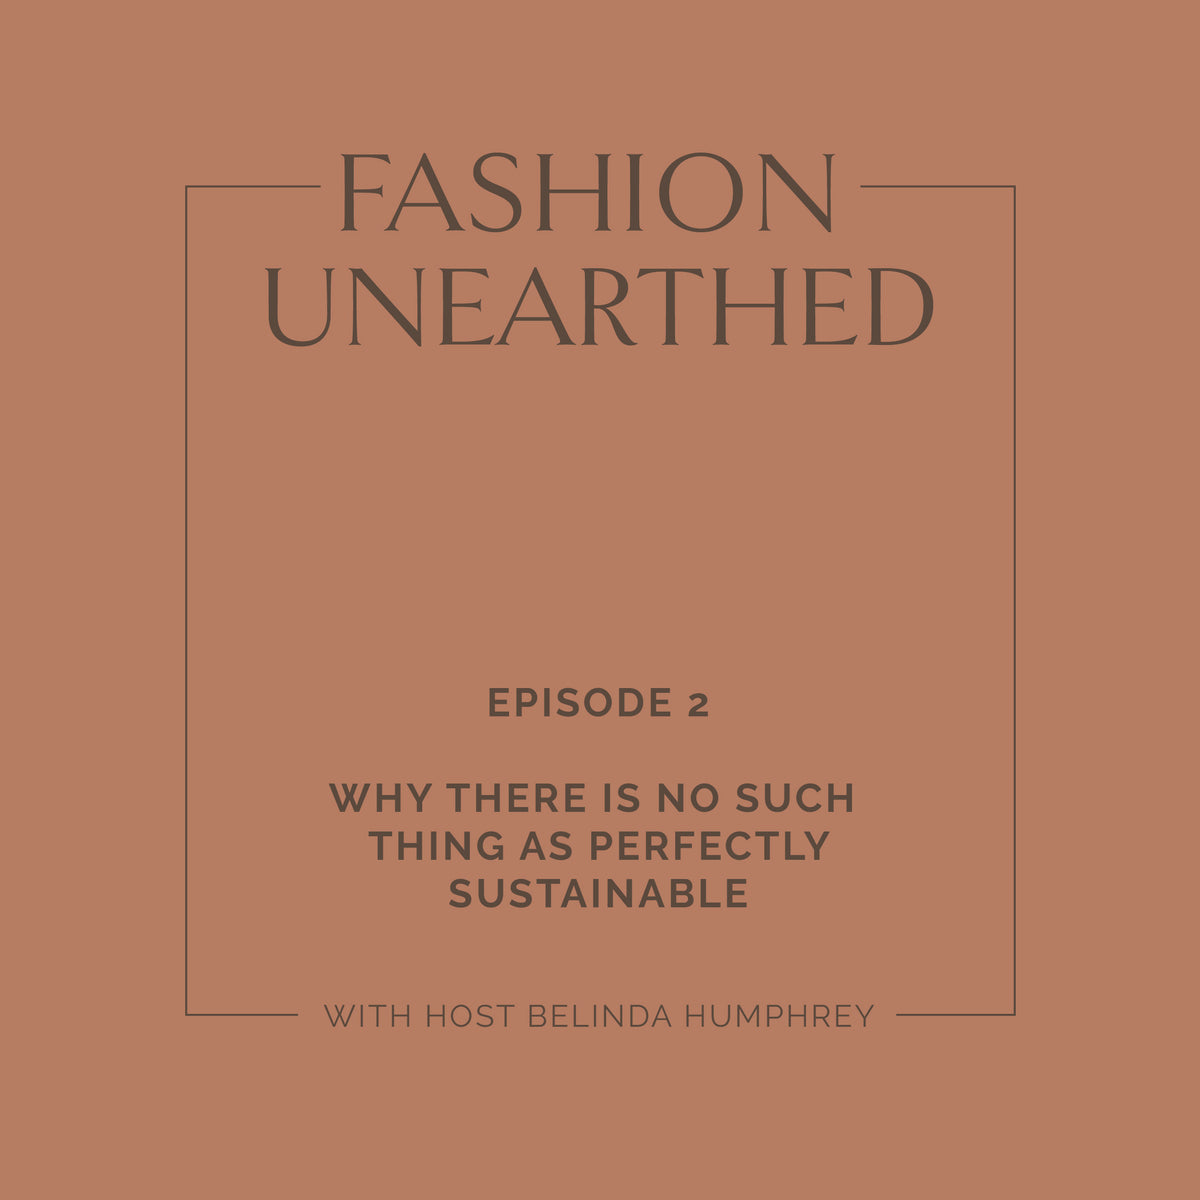 Episode 2: Why there is no such thing as perfectly sustainable.